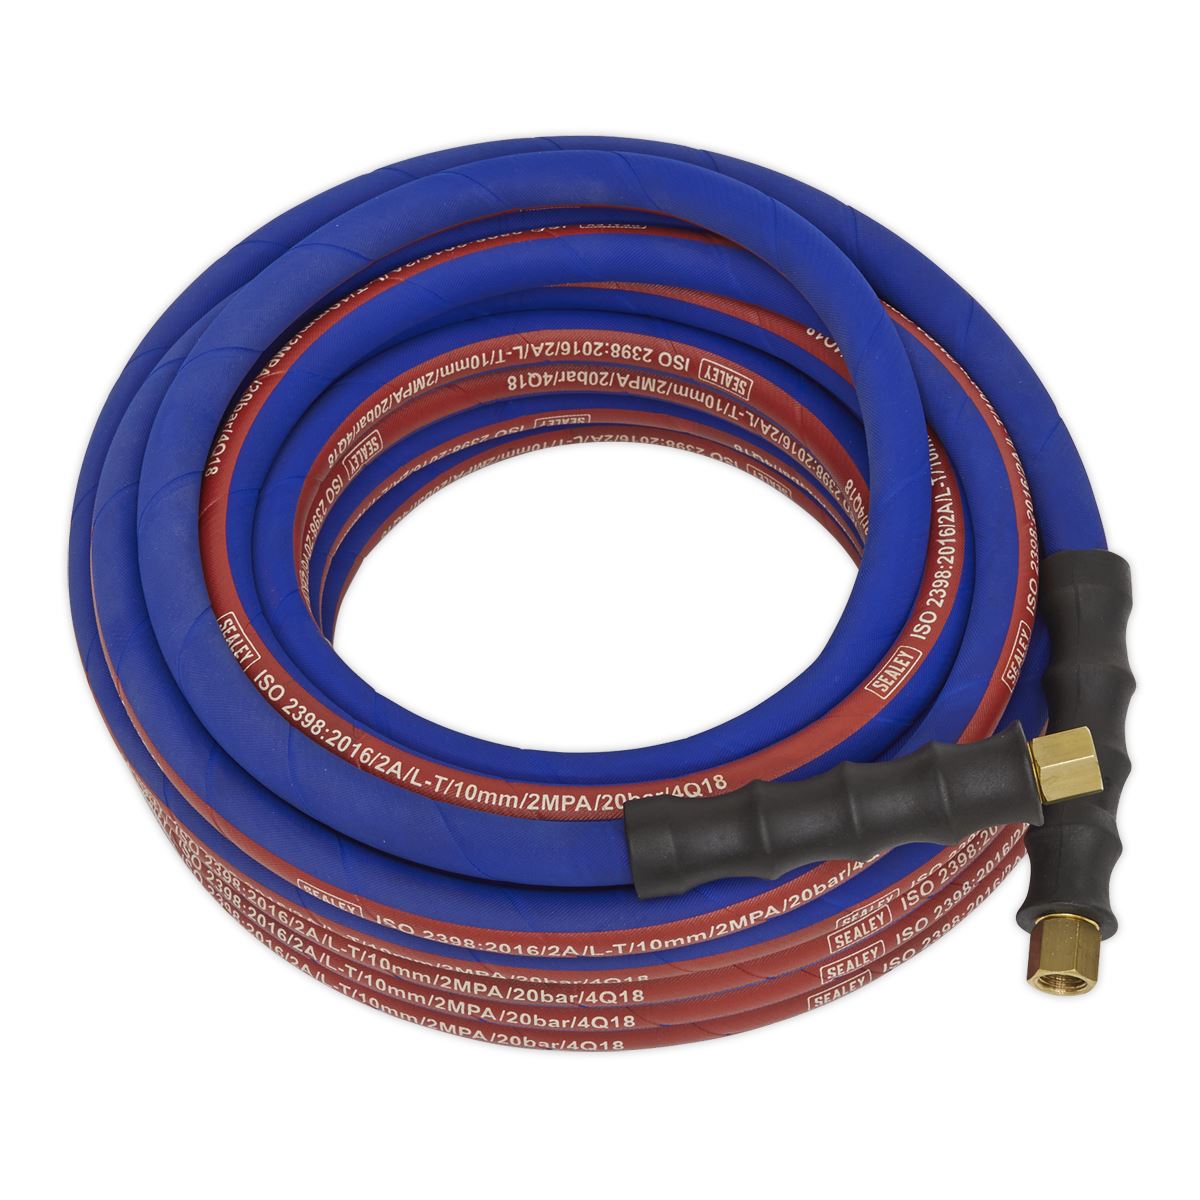 Sealey Air Hose 10m x Ø8mm with 1/4"BSP Unions Extra-Heavy-Duty